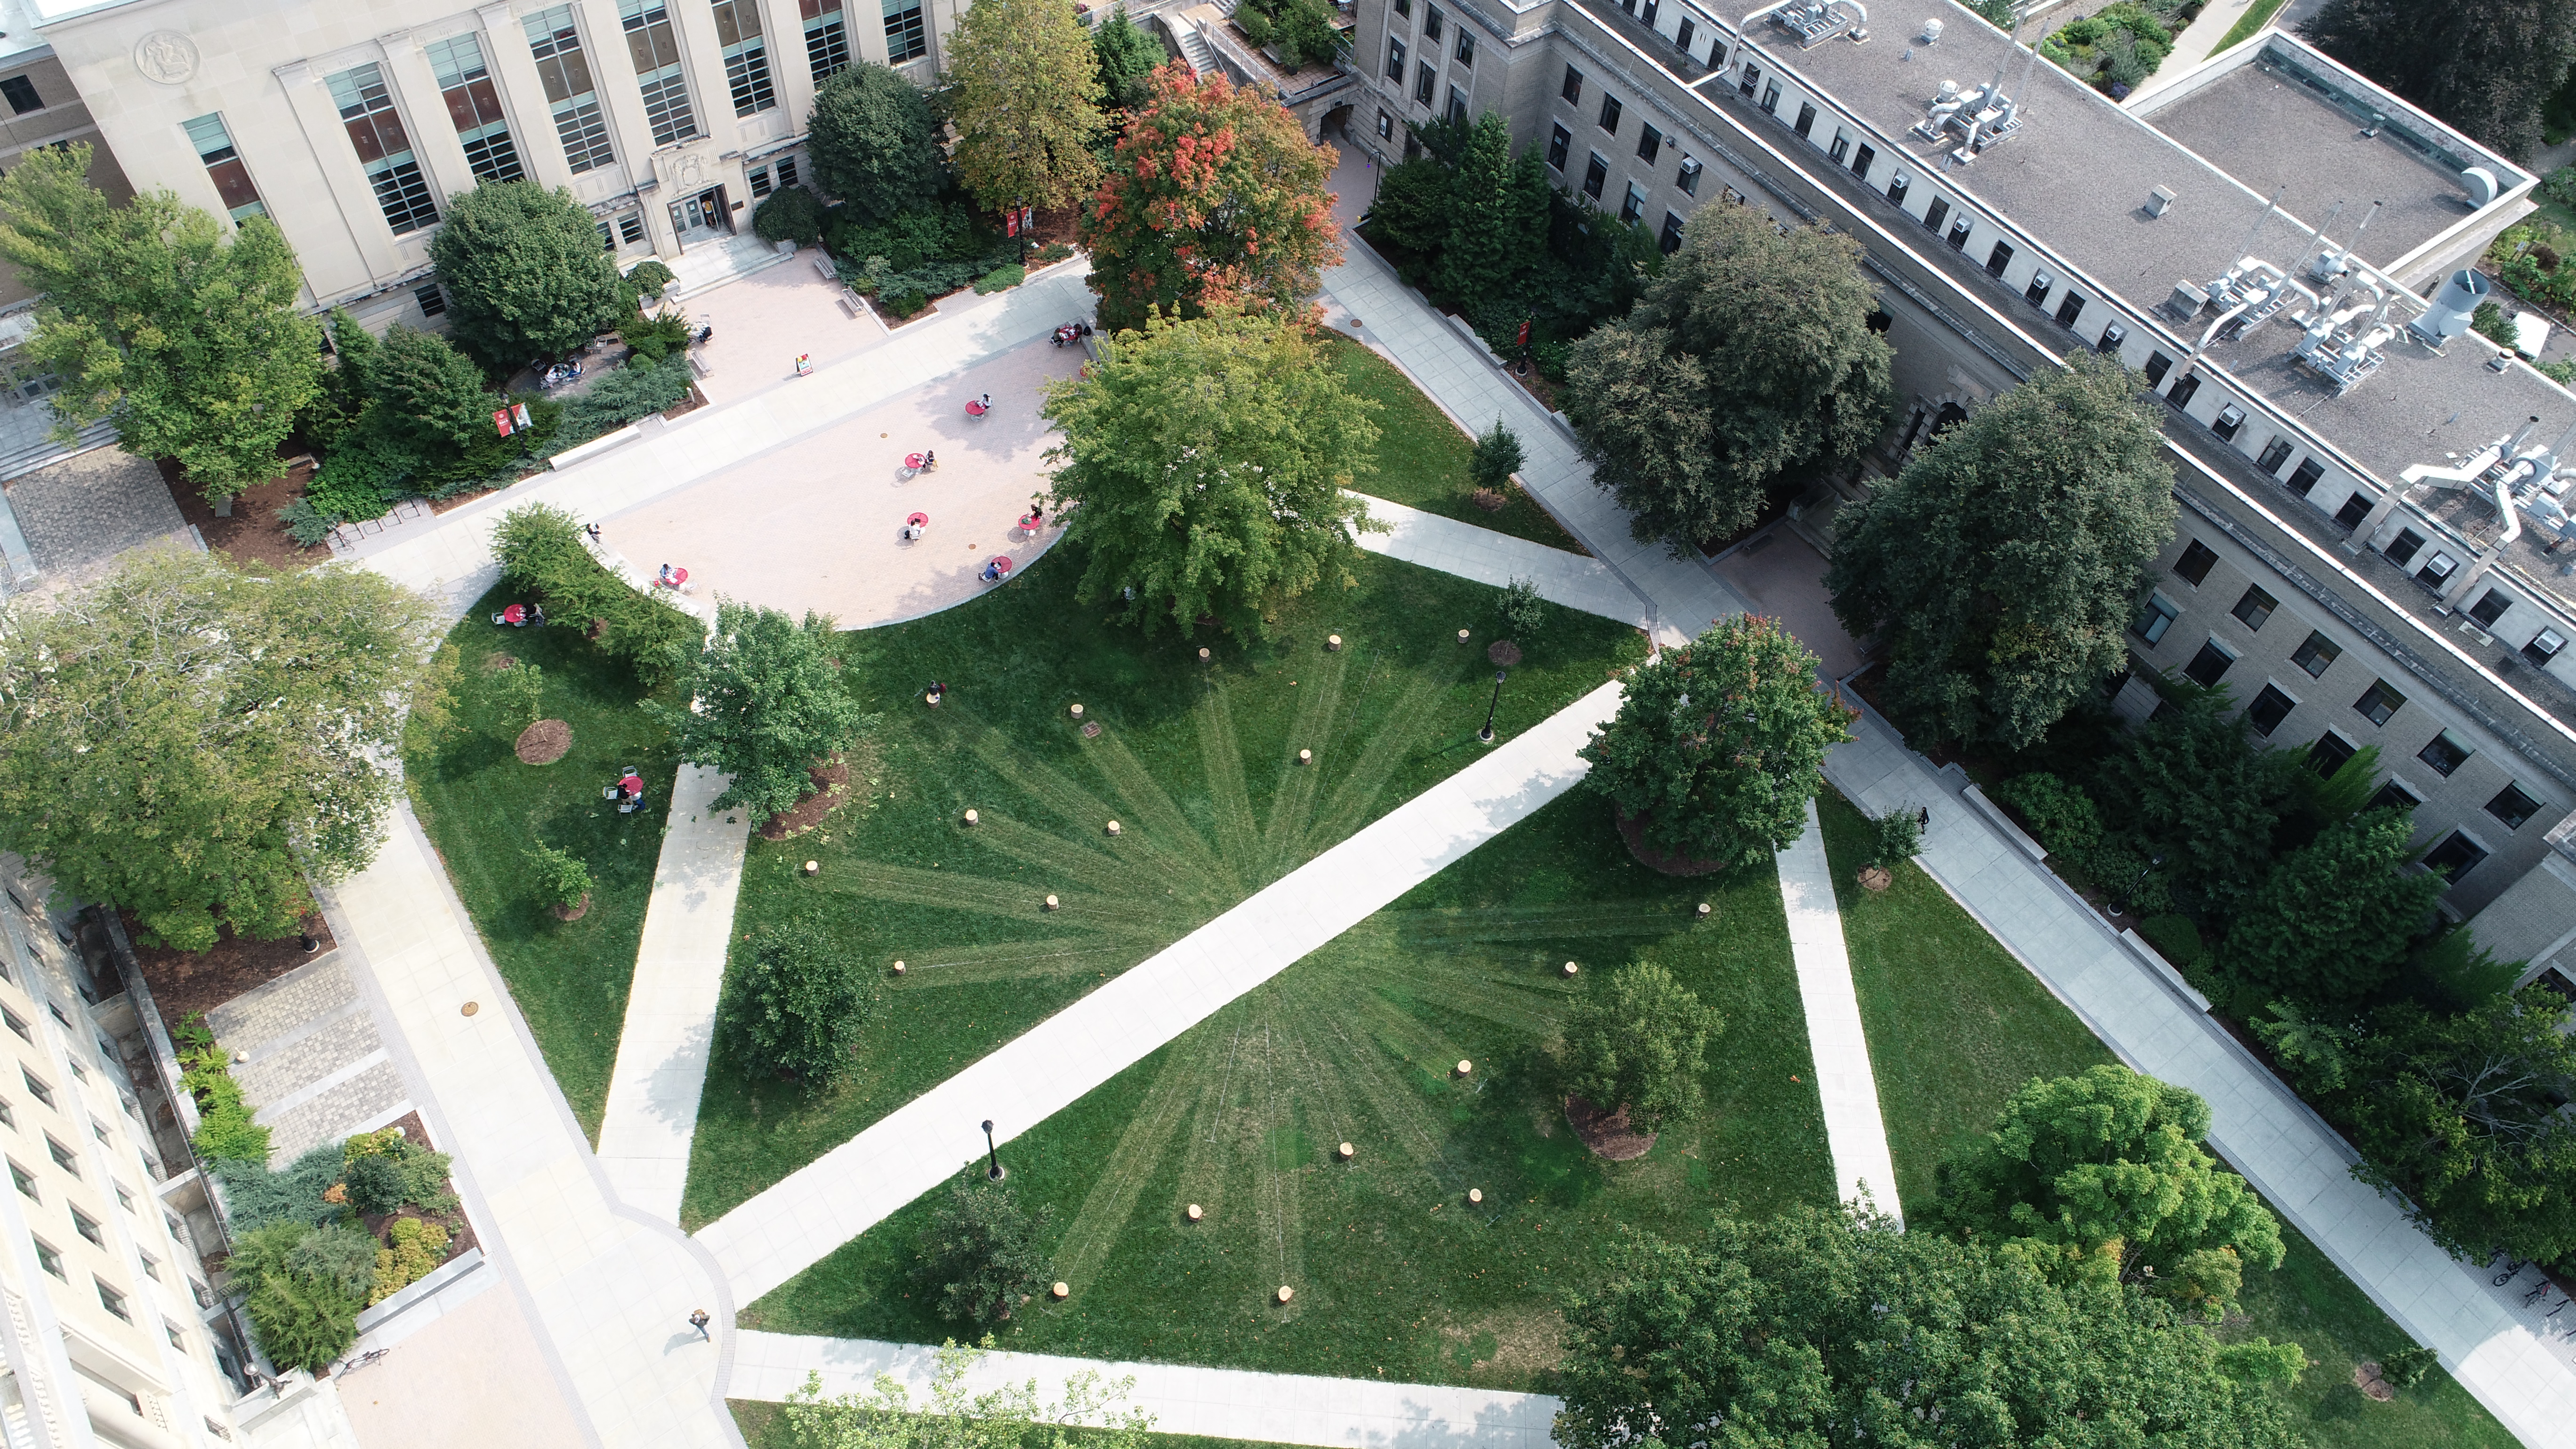 Image of Cornell Agriculture Quad Mowed Installation by DAS Lab